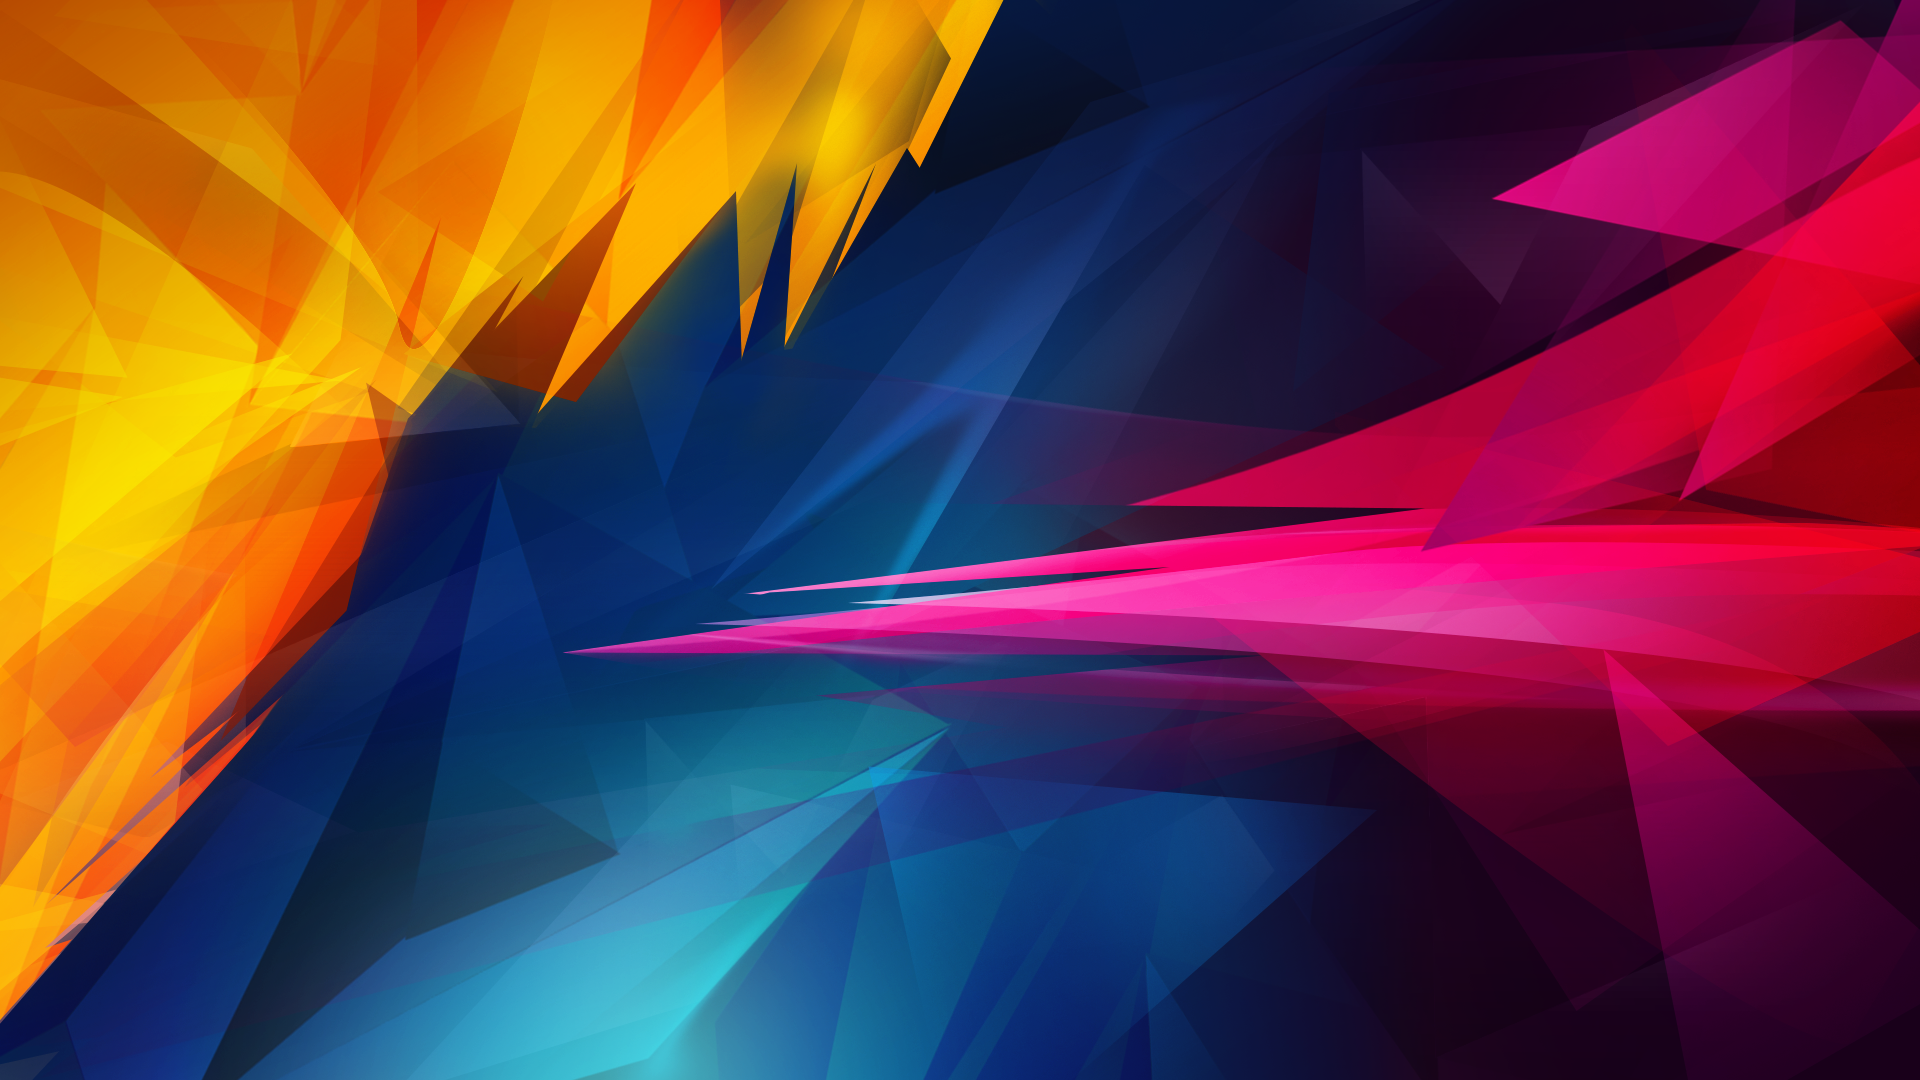 Abstract Wallpaper 1080p by SUPERsaeJANG on